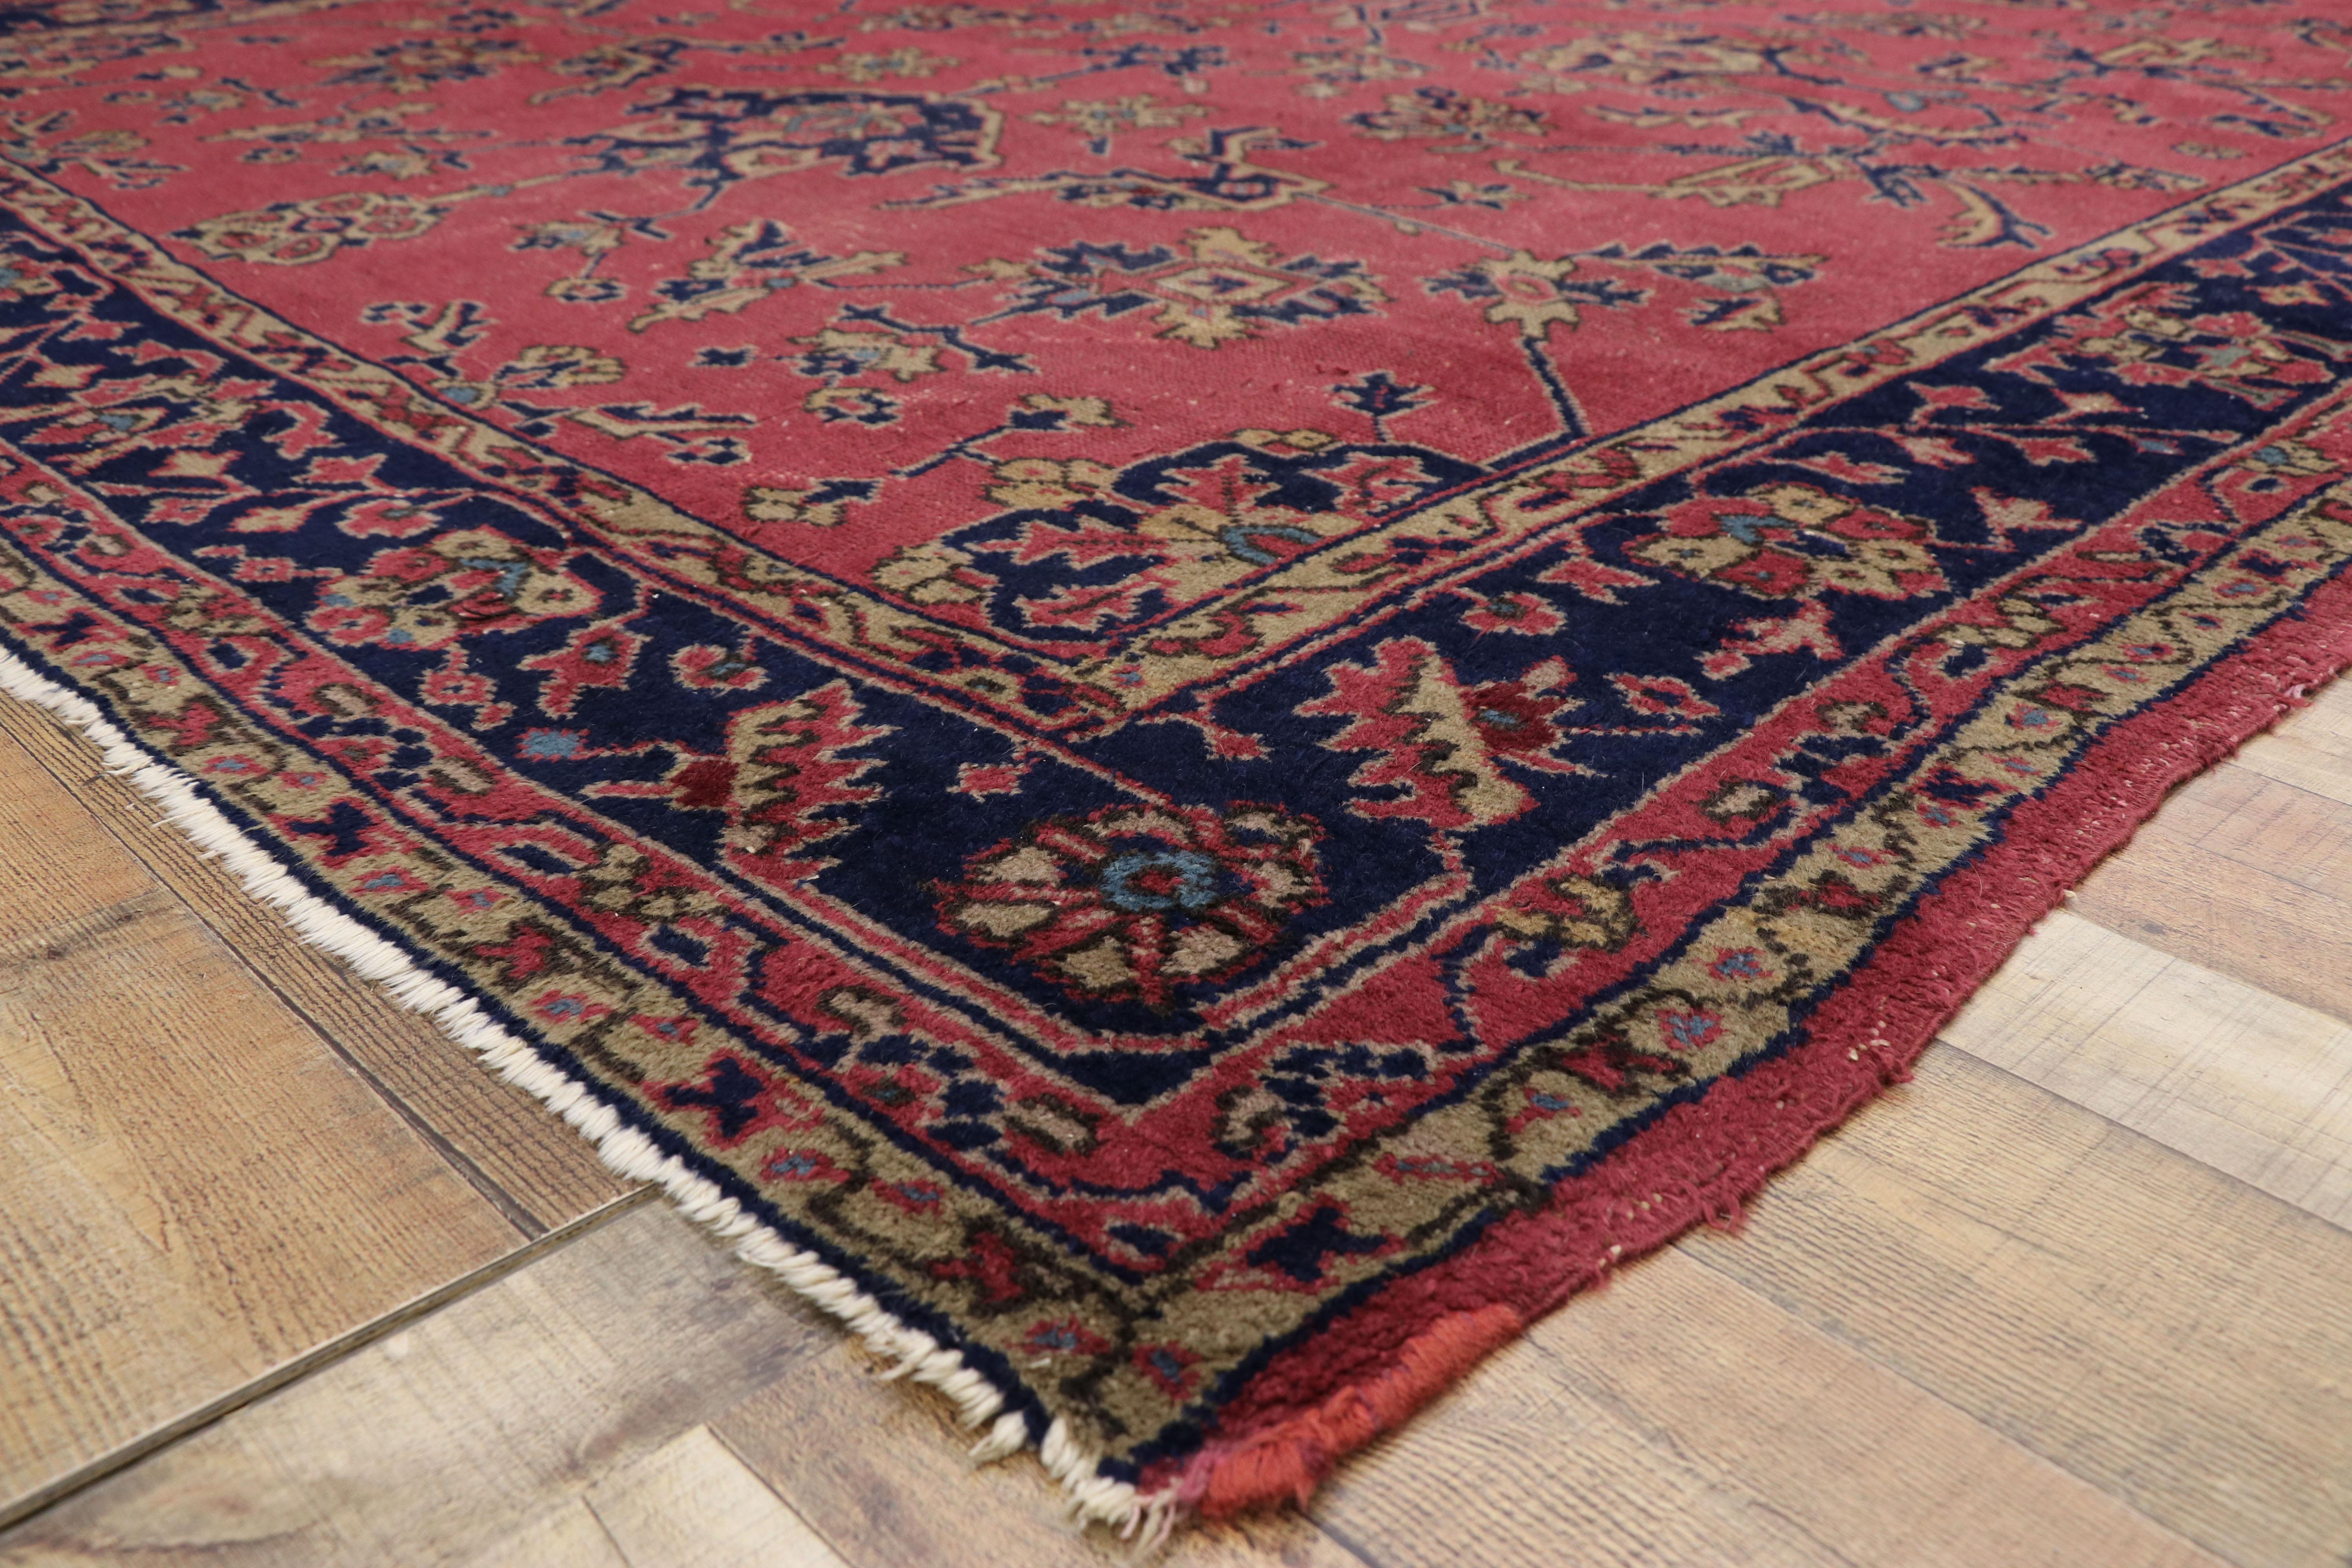 Wool Distressed Antique Turkish Sparta Rug with Industrial Romantic Venetian Style